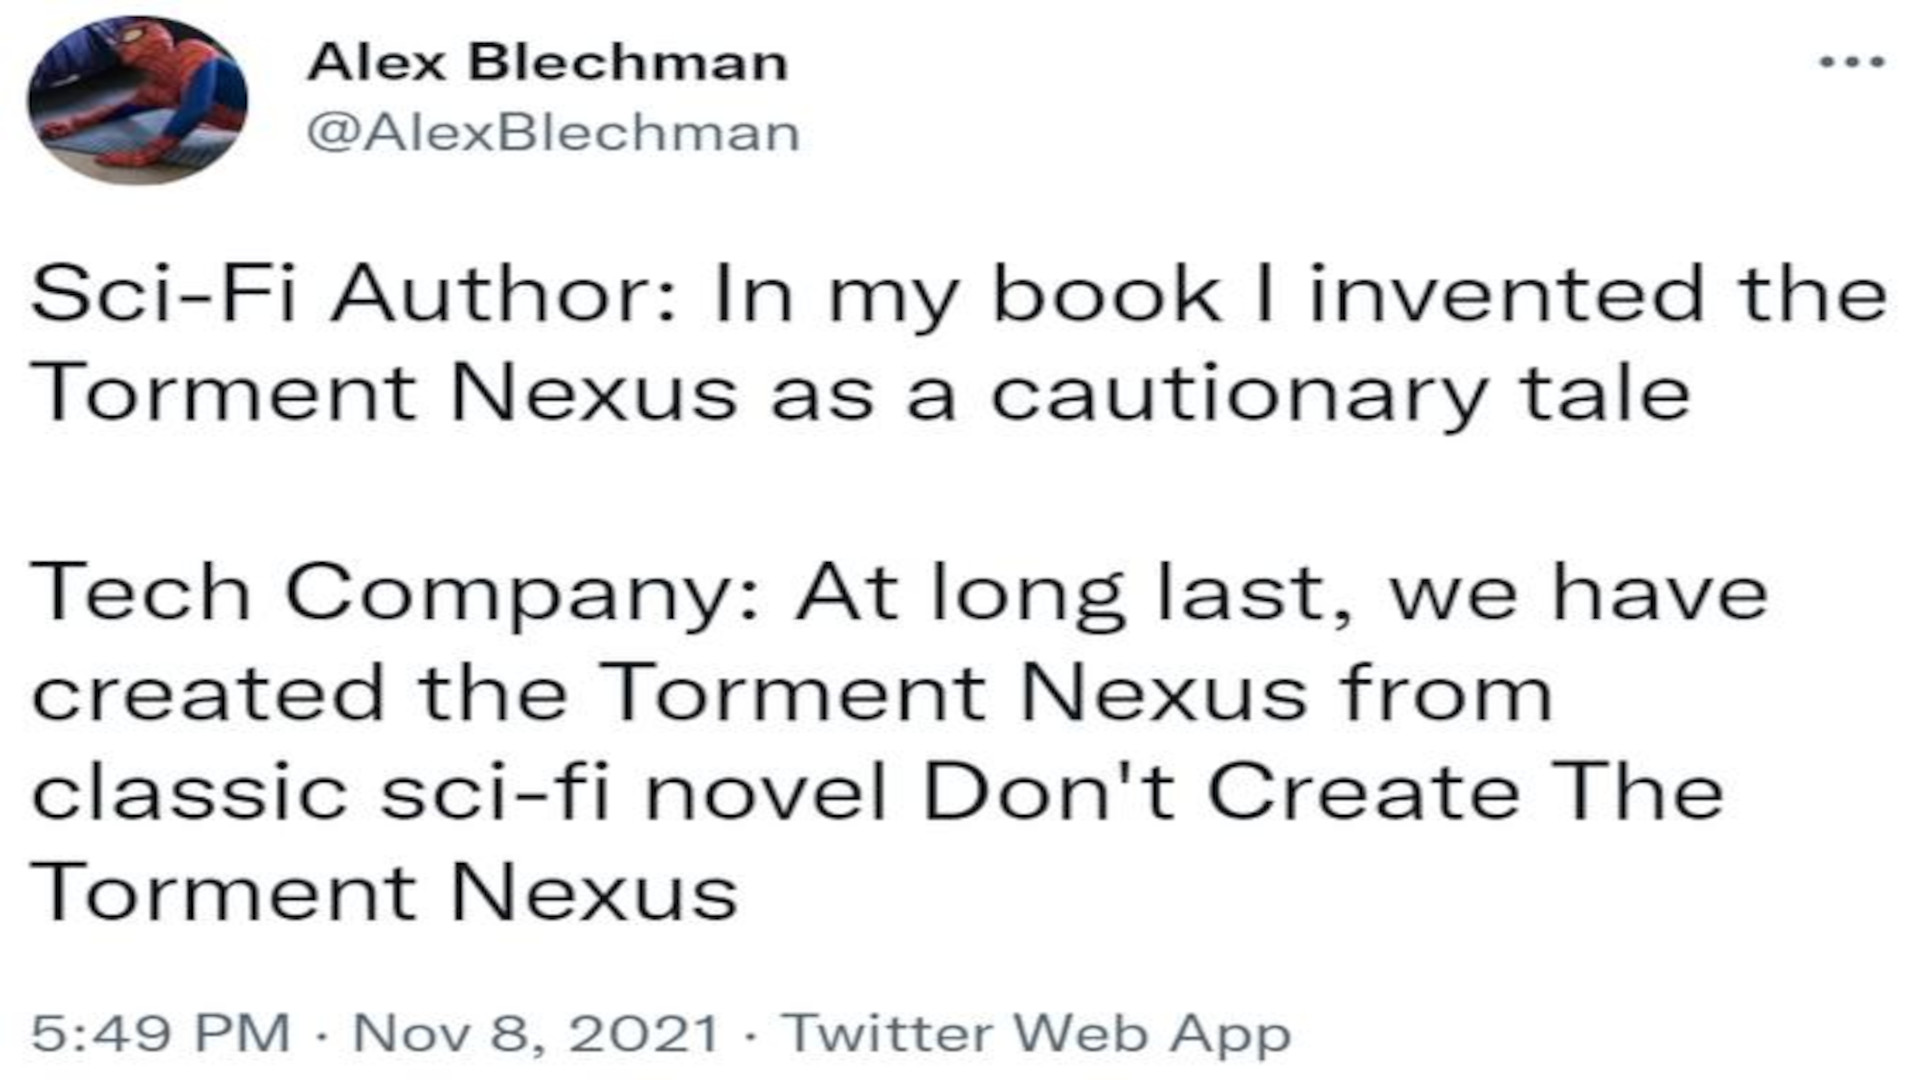 Sci-fi Author: In my book I invented the Torment Nexus as a cautionary tale. Tech Company: At long last, we have created the Torment Nexus from classic sci-fi novel Don't Create The Torment Nexus